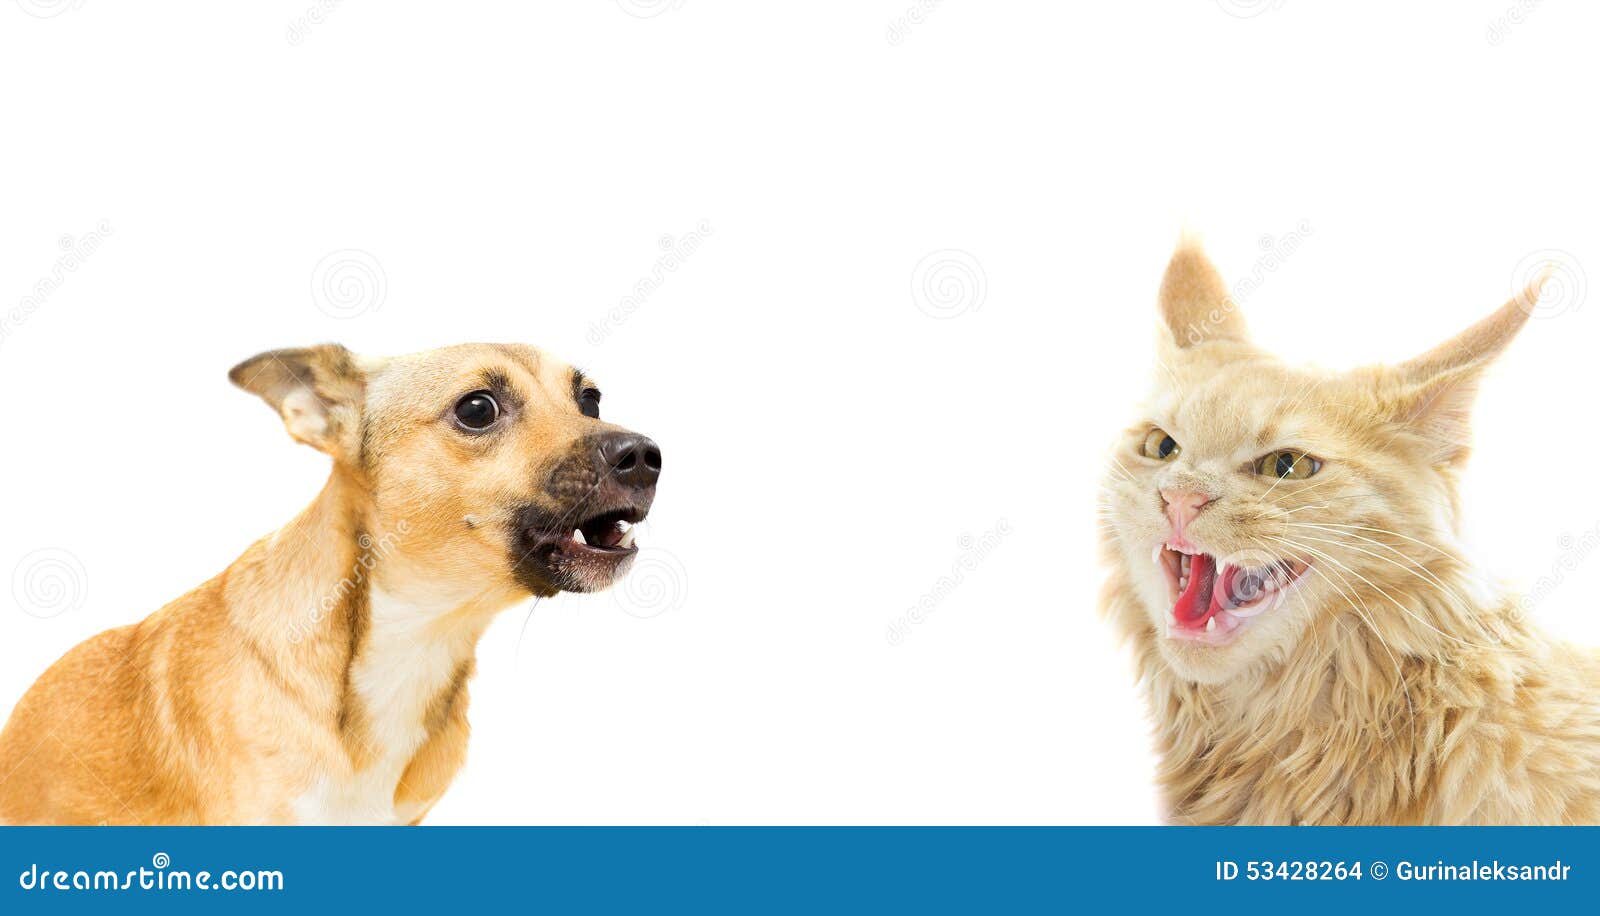 Angry Cat  Angry cat, Angry animals, Angry dog